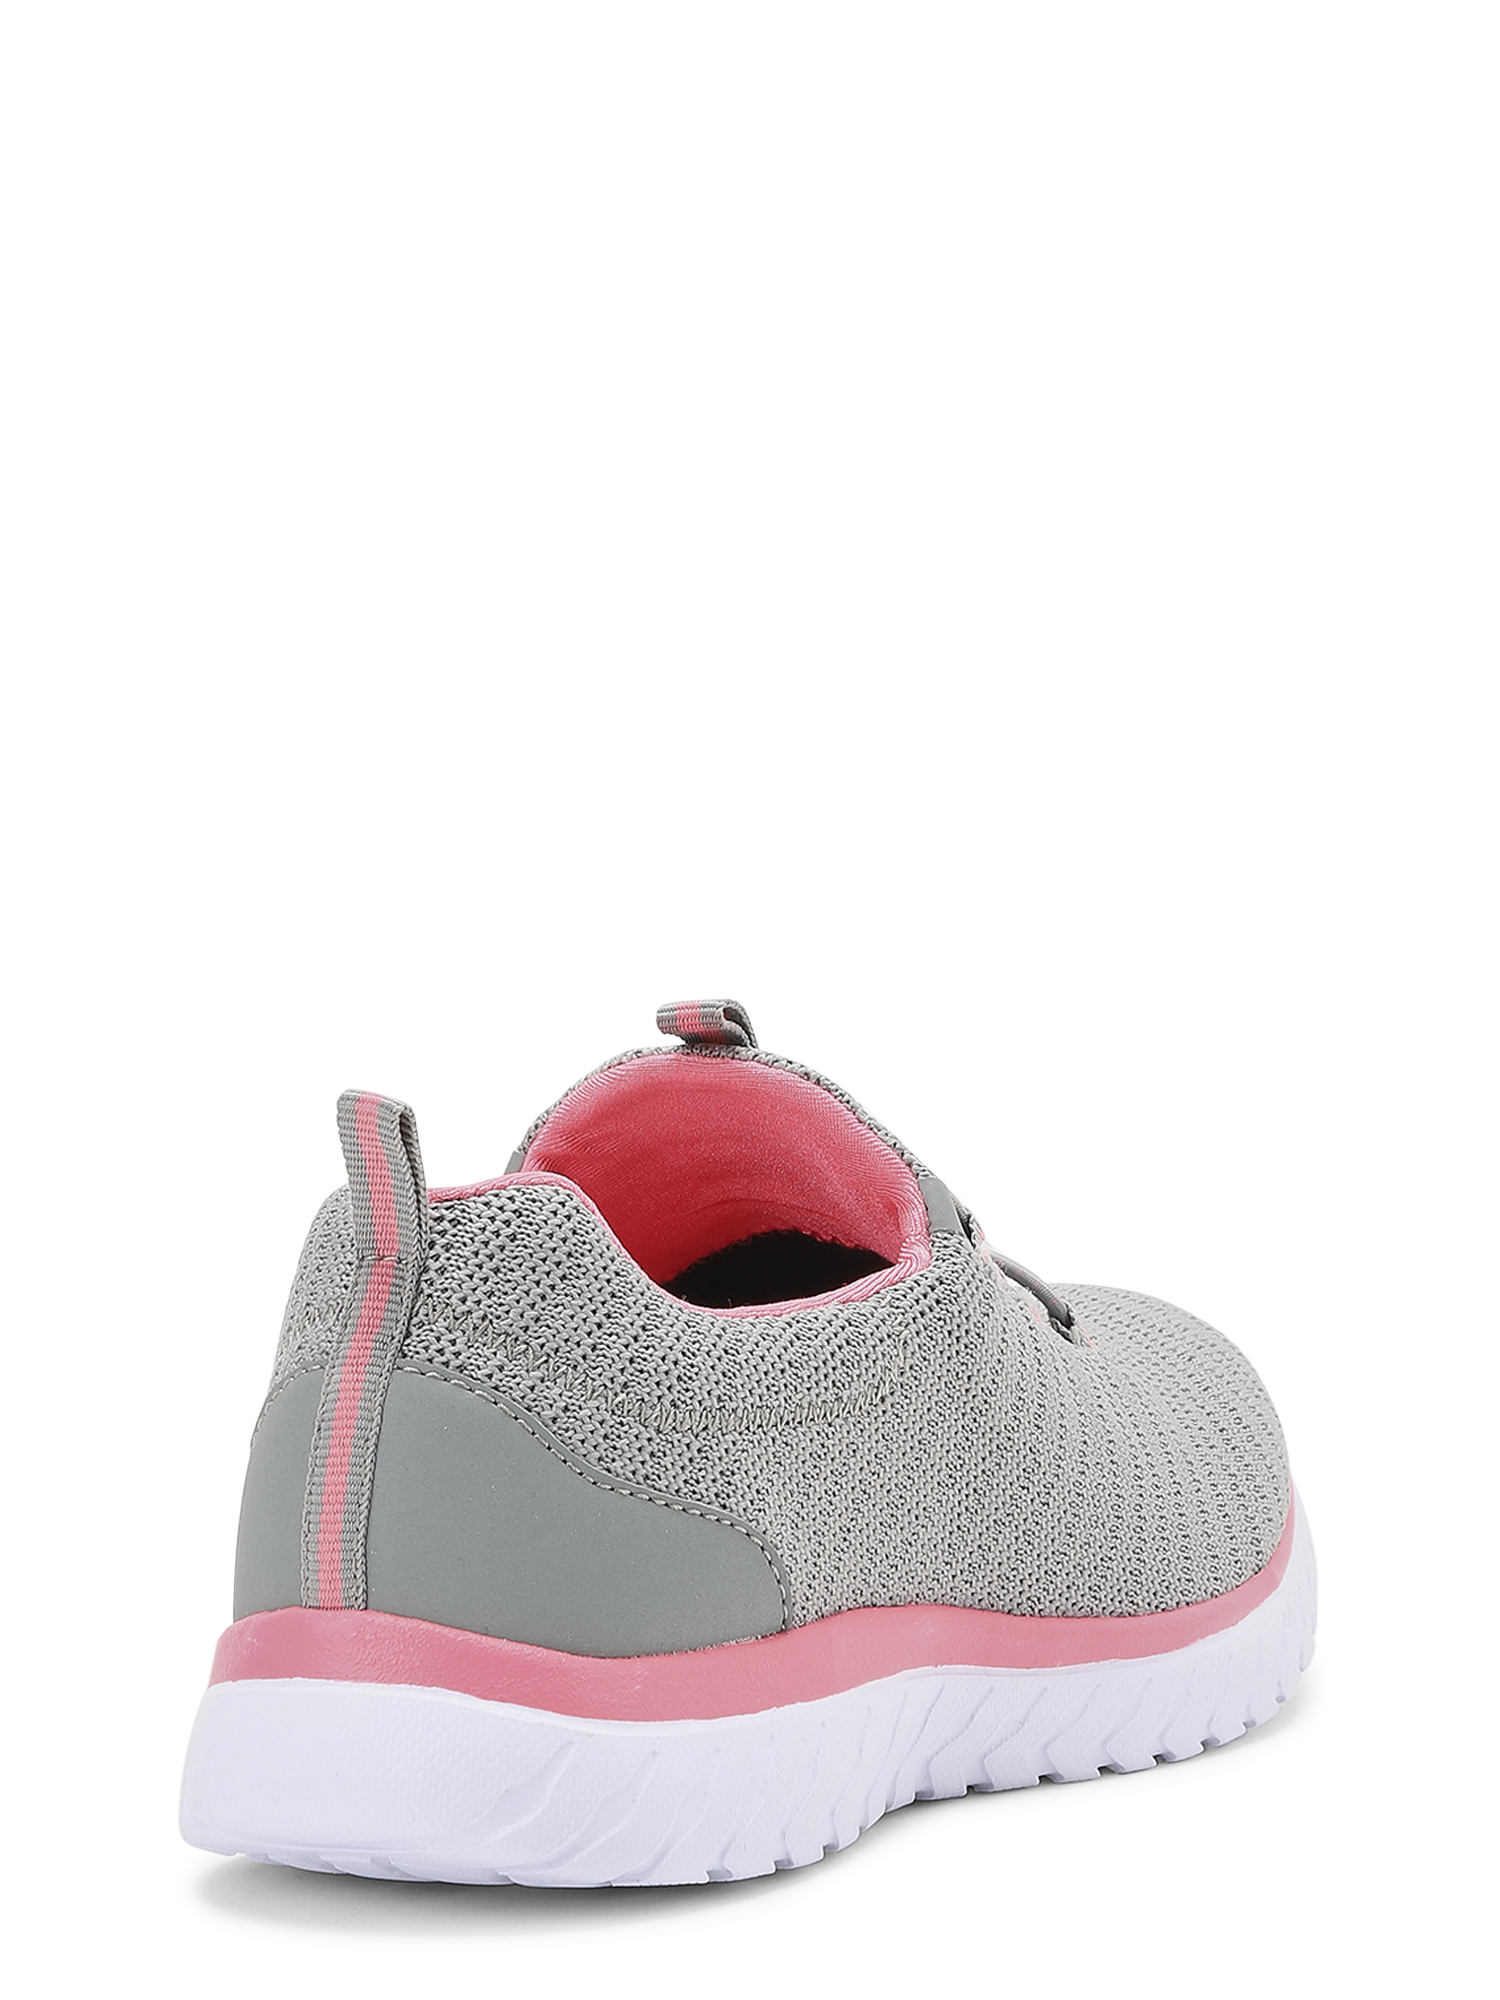 Athletic Works Women’s Bungee Slip On Sneakers, Wide Width Available - image 5 of 6